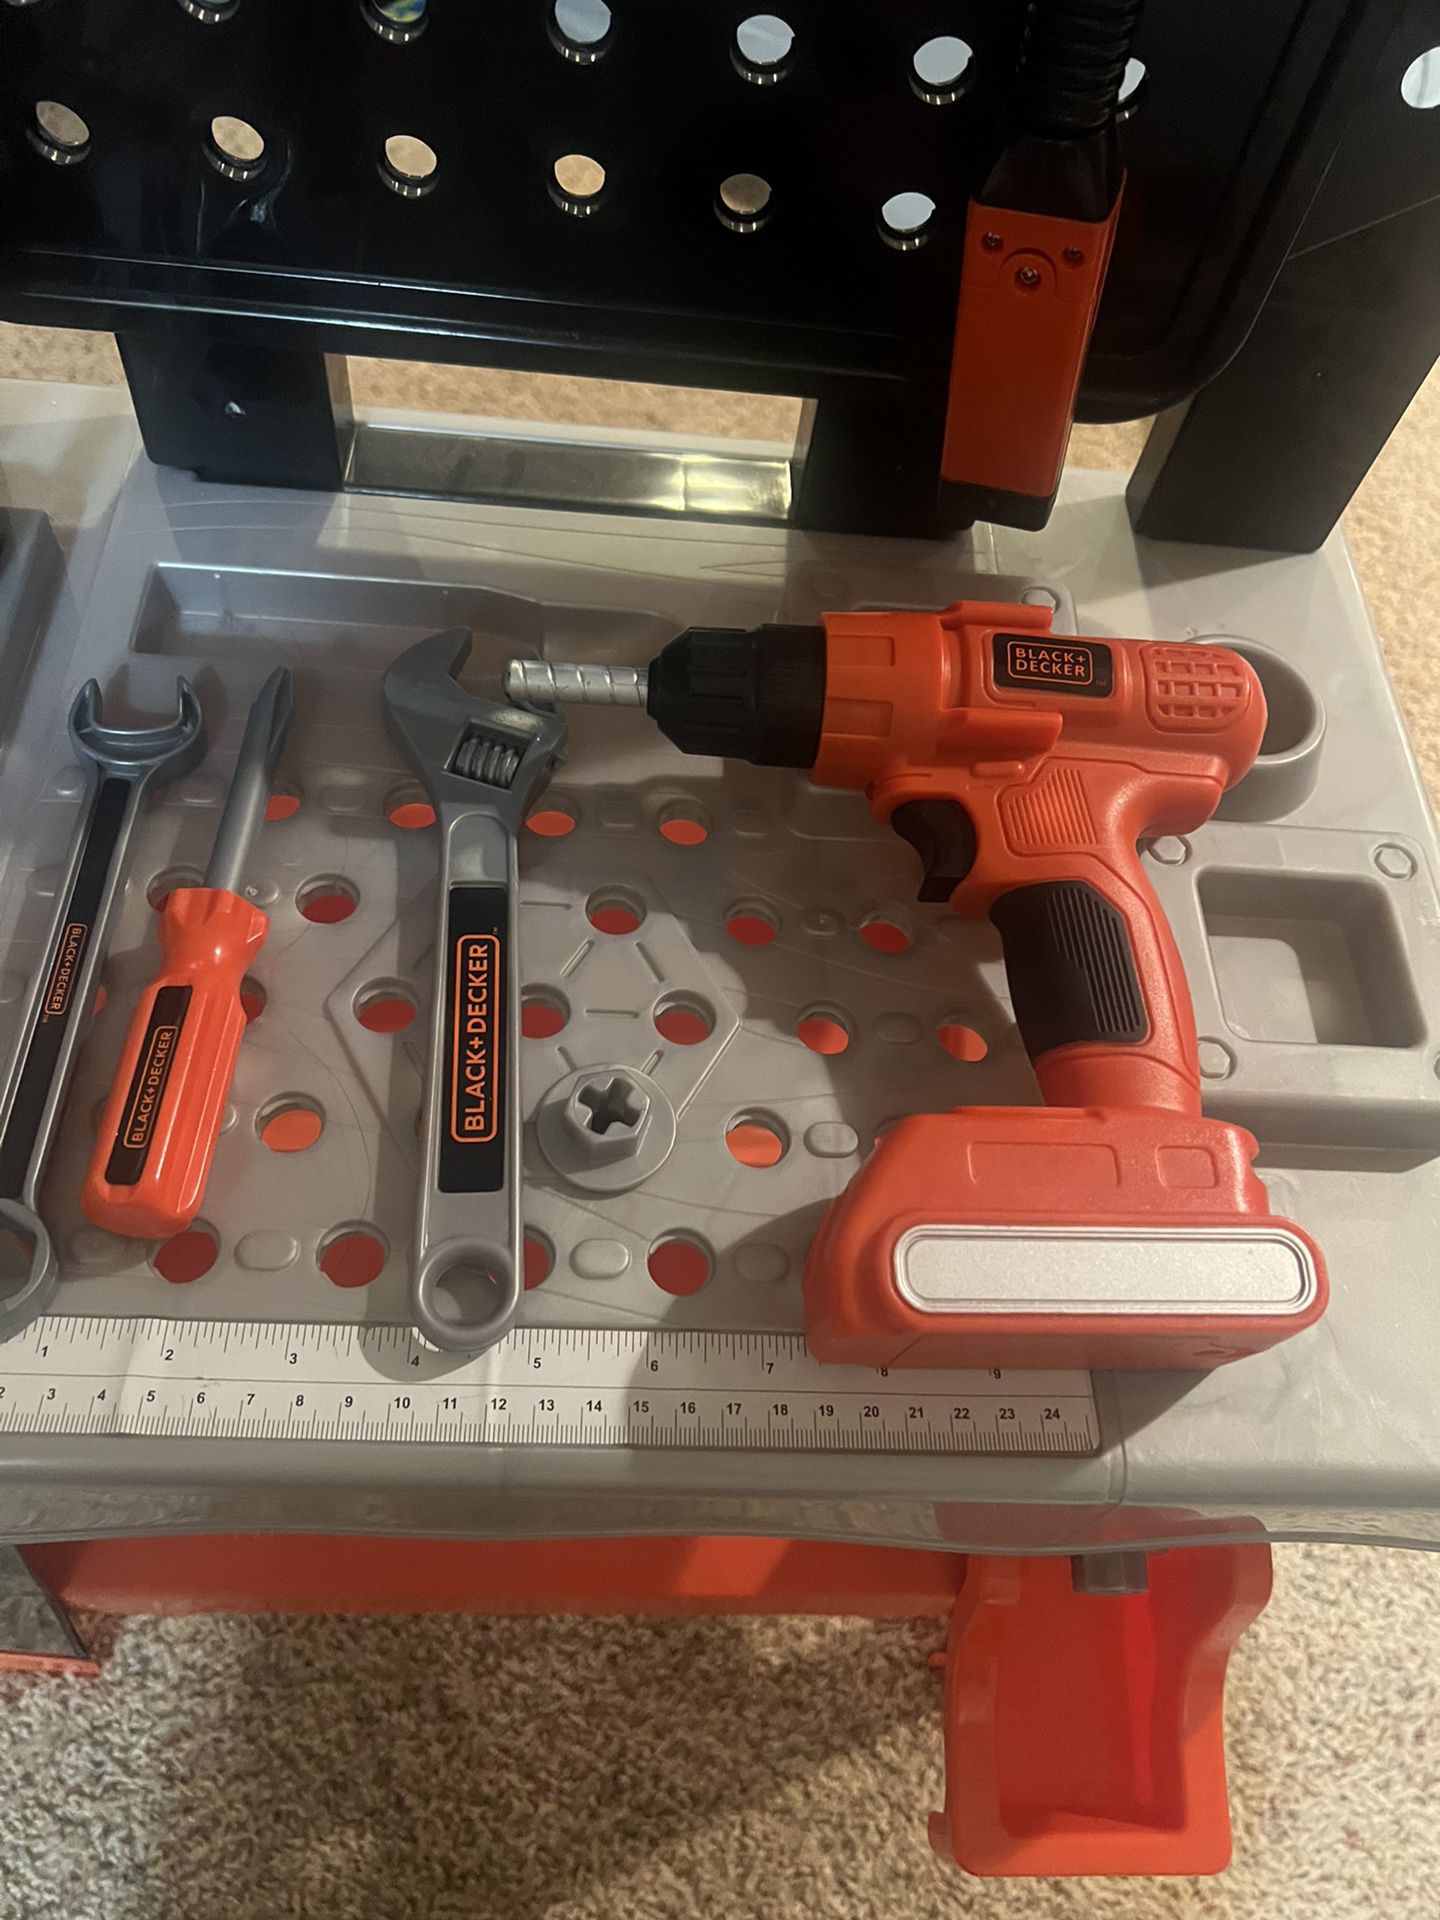 Black and Decker Kids Workshop and Workbench for Sale in Crystal